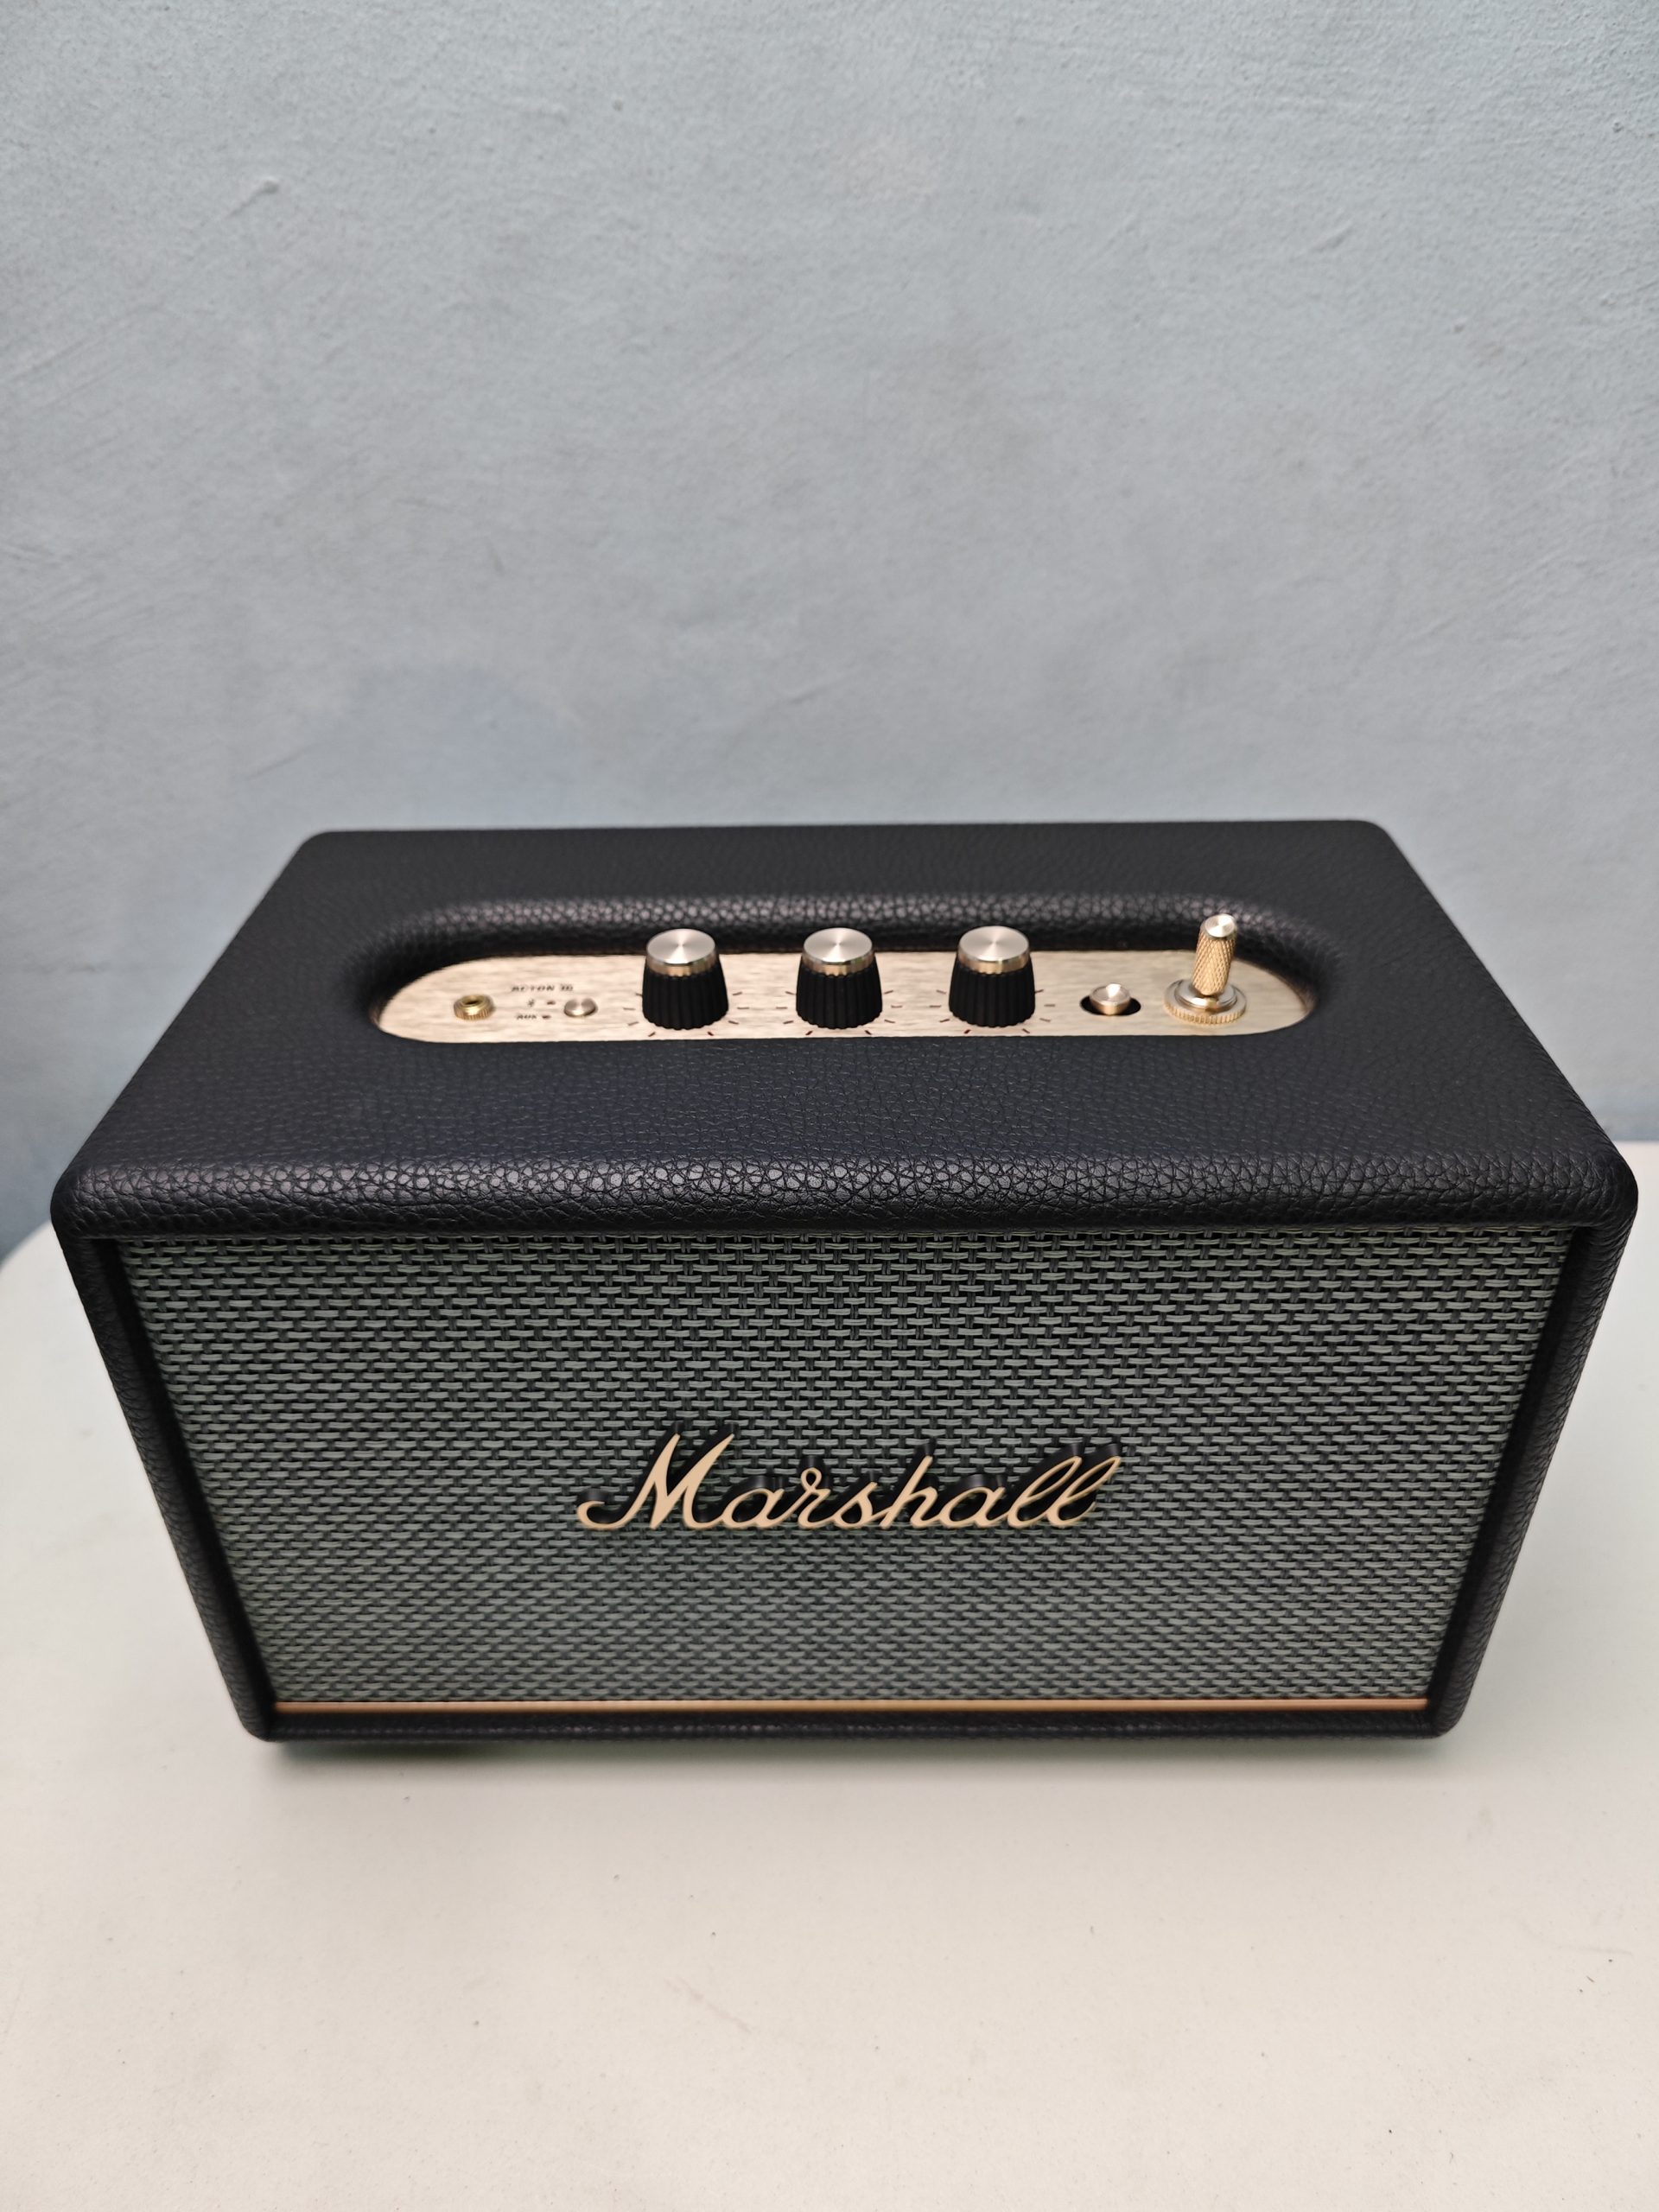 Marshall Stanmore III review: iconic style, superb sound